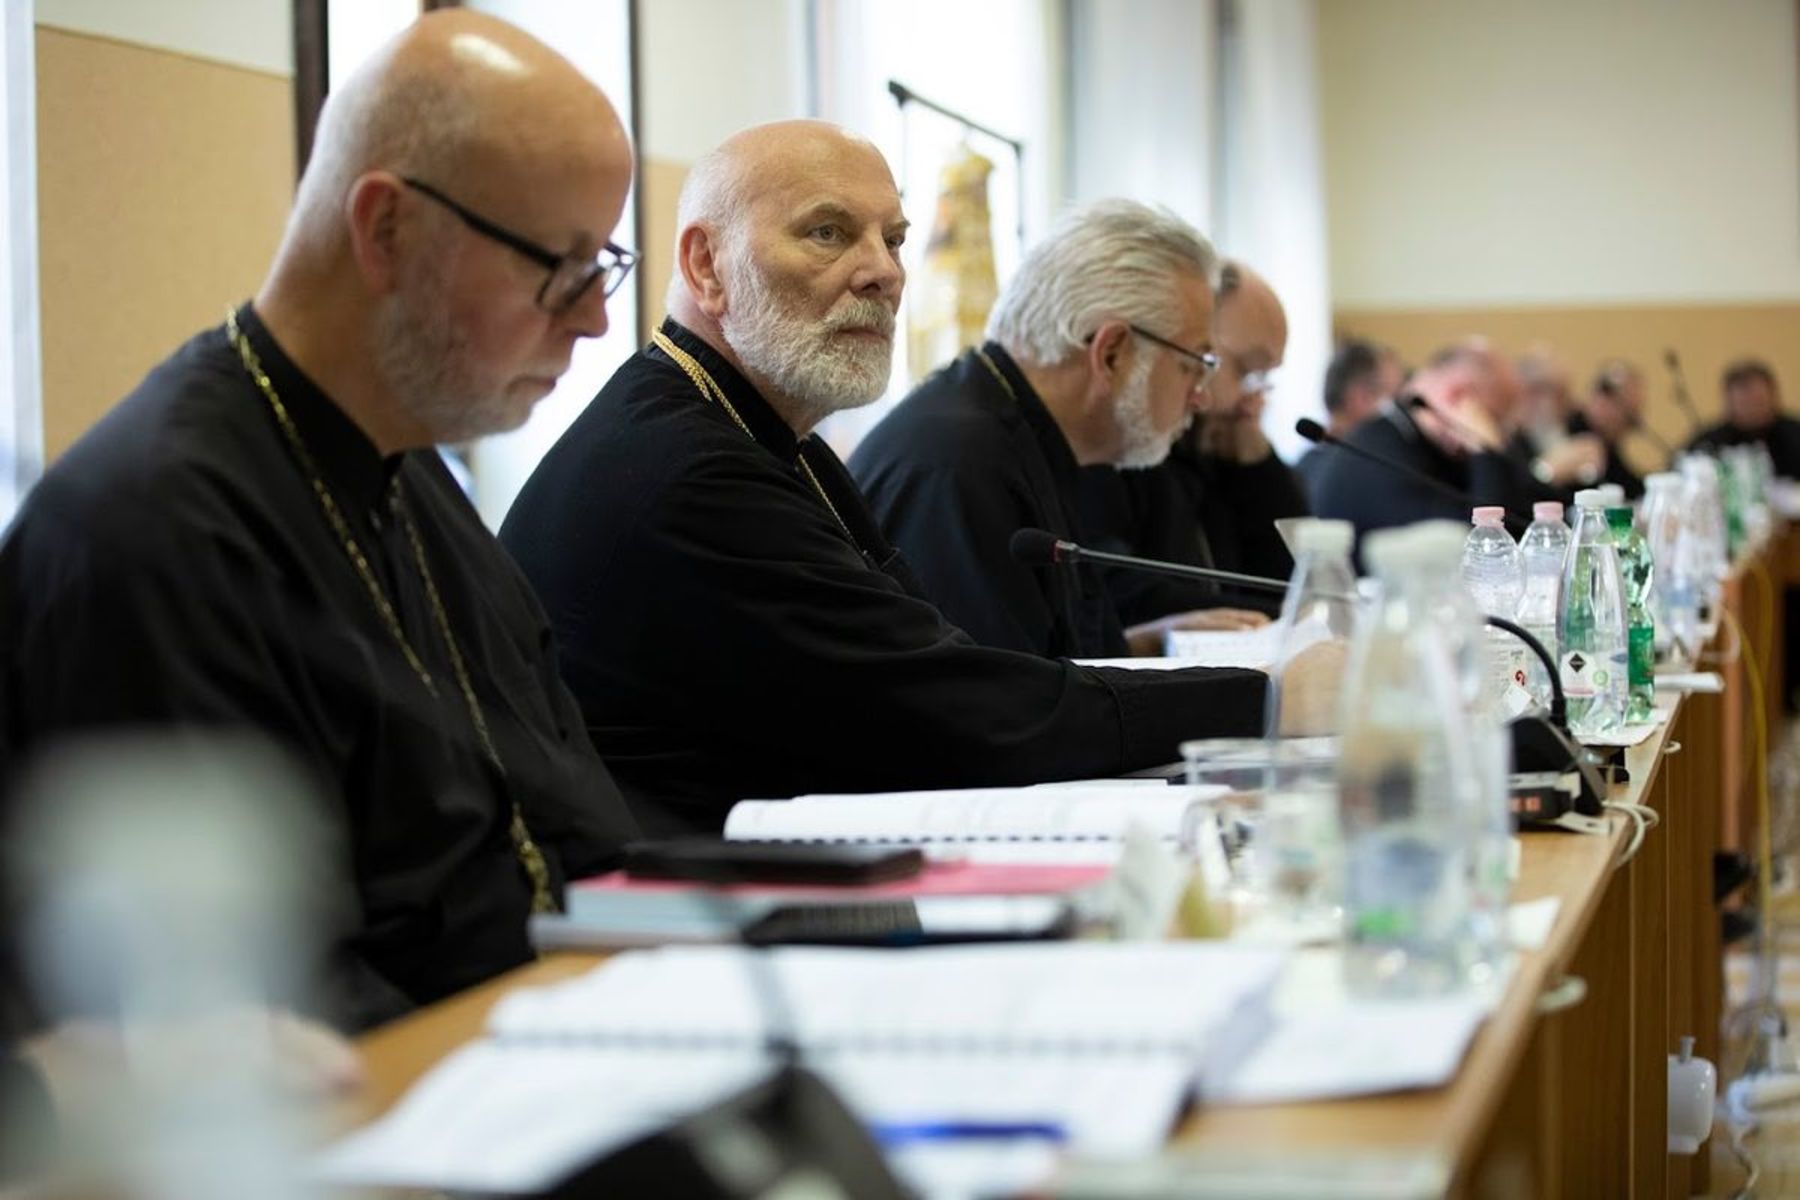 Bishop Ken Nowakowski Presents a Report on Pastoral Council Activities at the Synod